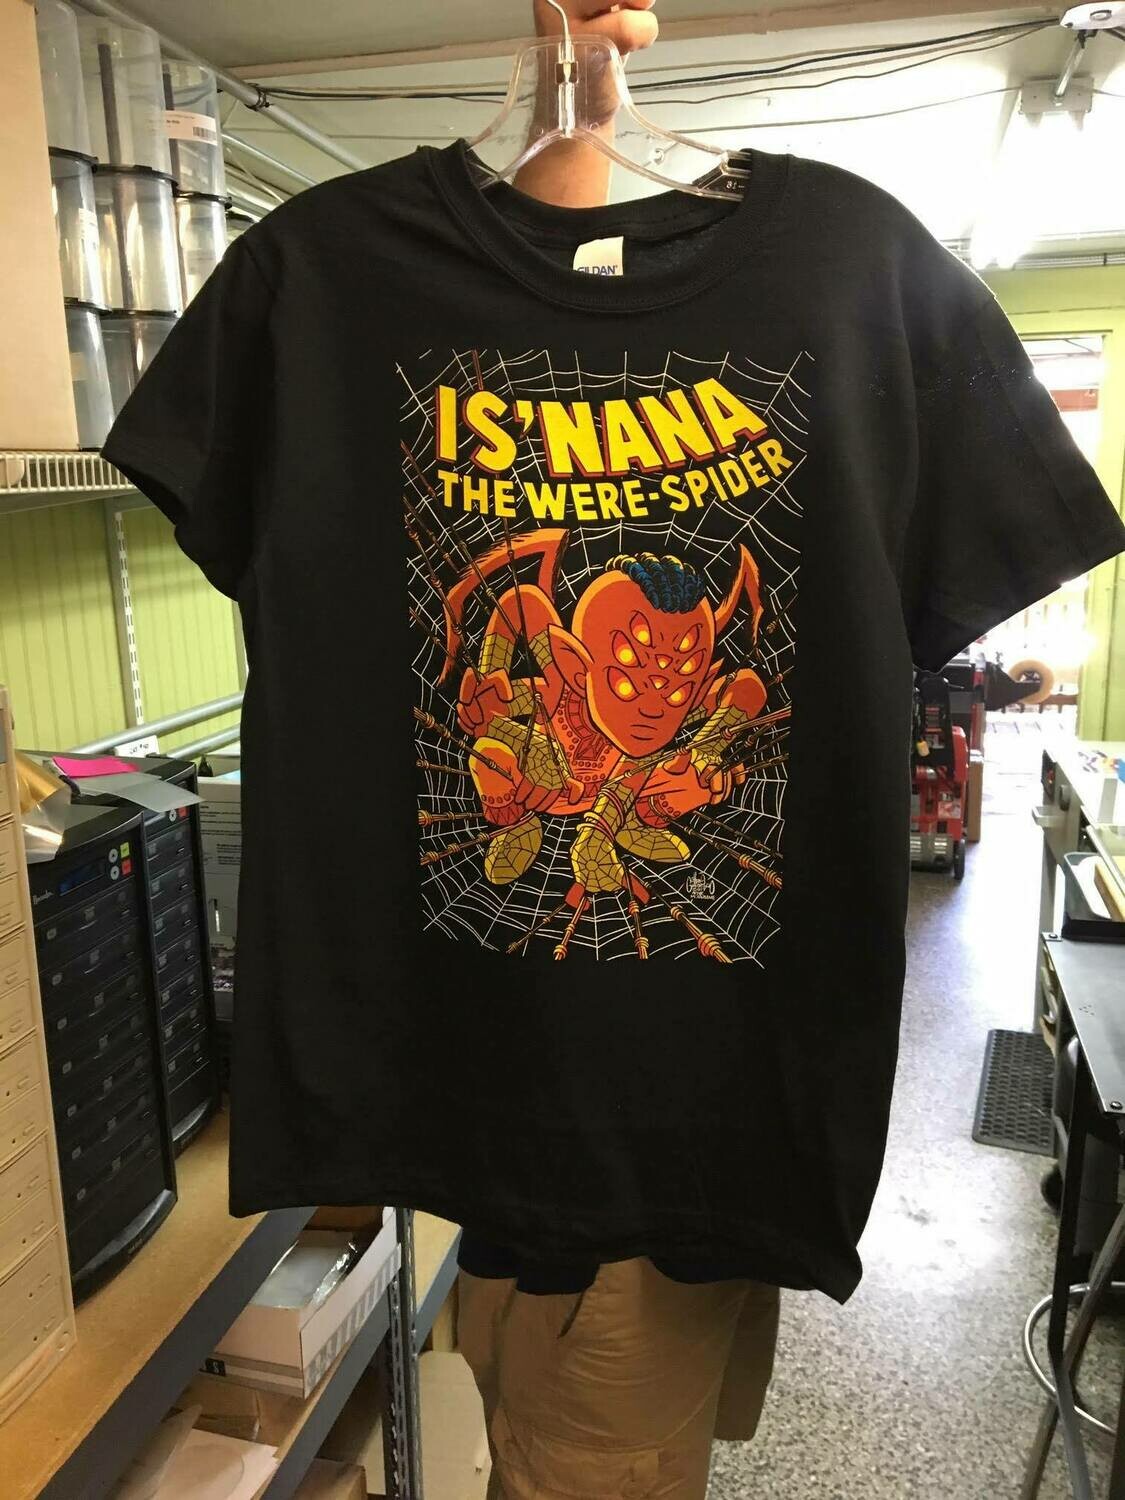 Is'nana the Were-Spider T-shirt designed by Chris Giarrusso